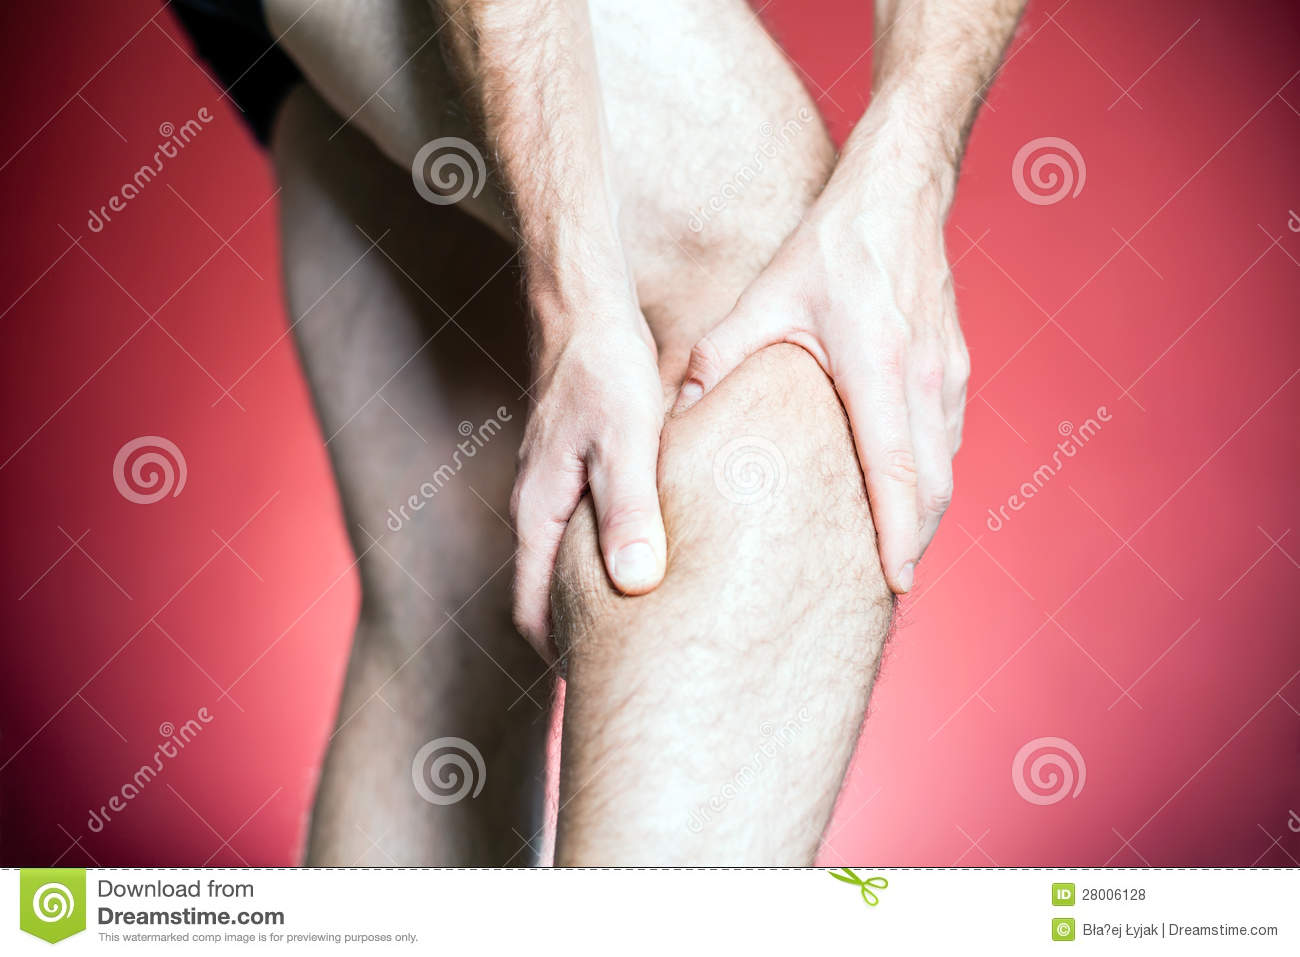 Knee Pain Man Holding Leg Making Massage With Hands  Physical Injury